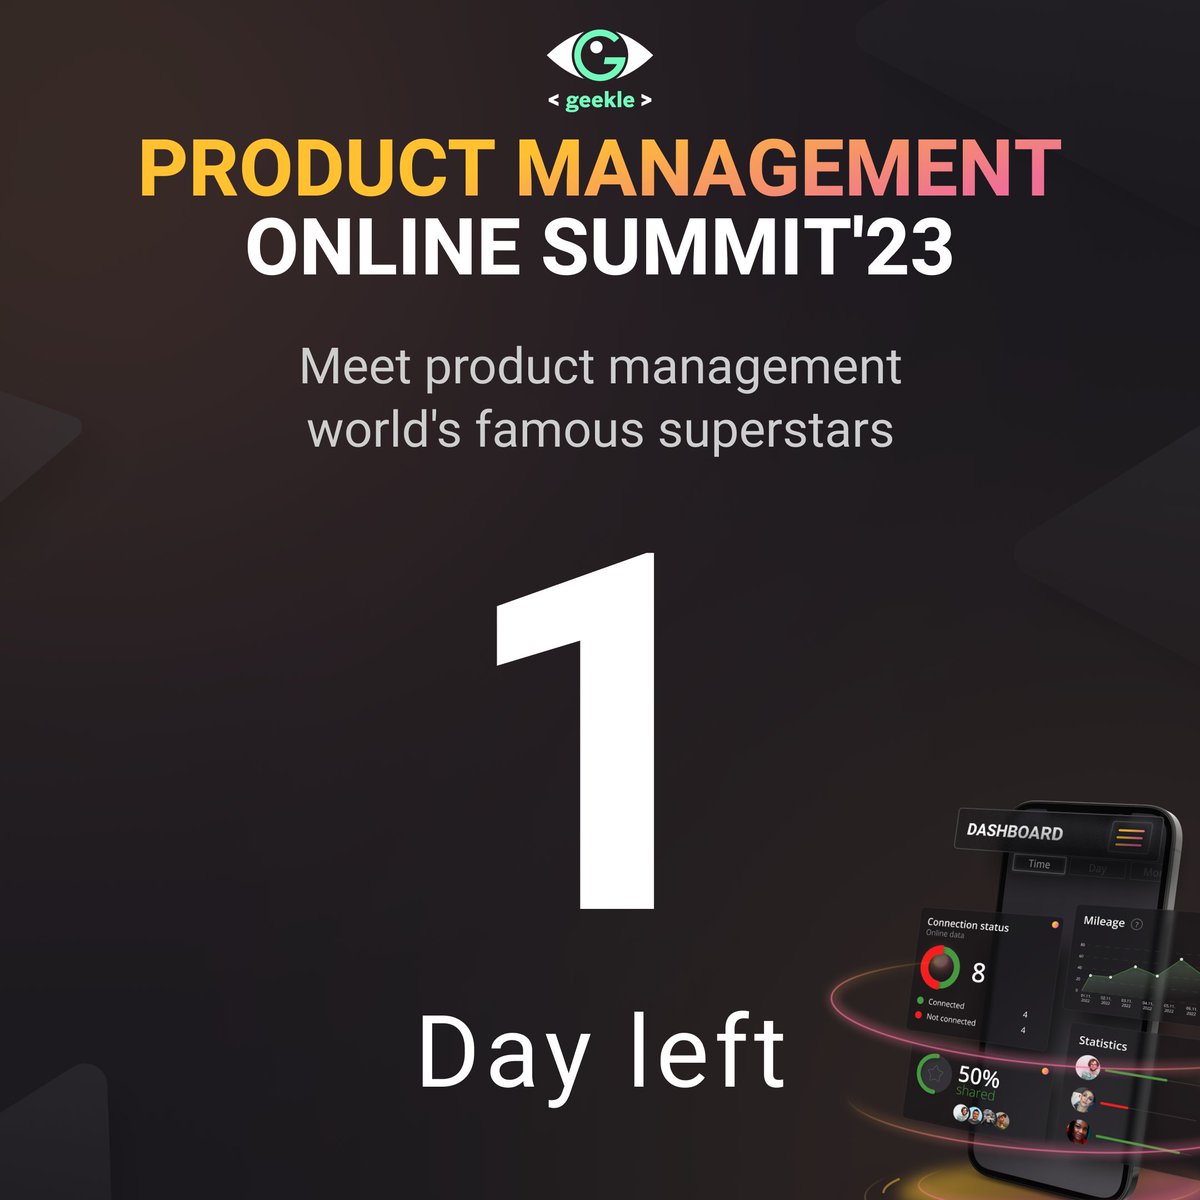 Product Management Online Summit'23 is going live in 1 day 🔥May 2 - Junior Track 09:00 - 16:10 (UTC) 🔥May 3 - Senior Track 09:00 - 16:25 (UTC) If you wanna know the exact time when your favorite speakers will be live, check the stacked agendas 👀 Join events.geekle.us/pm/